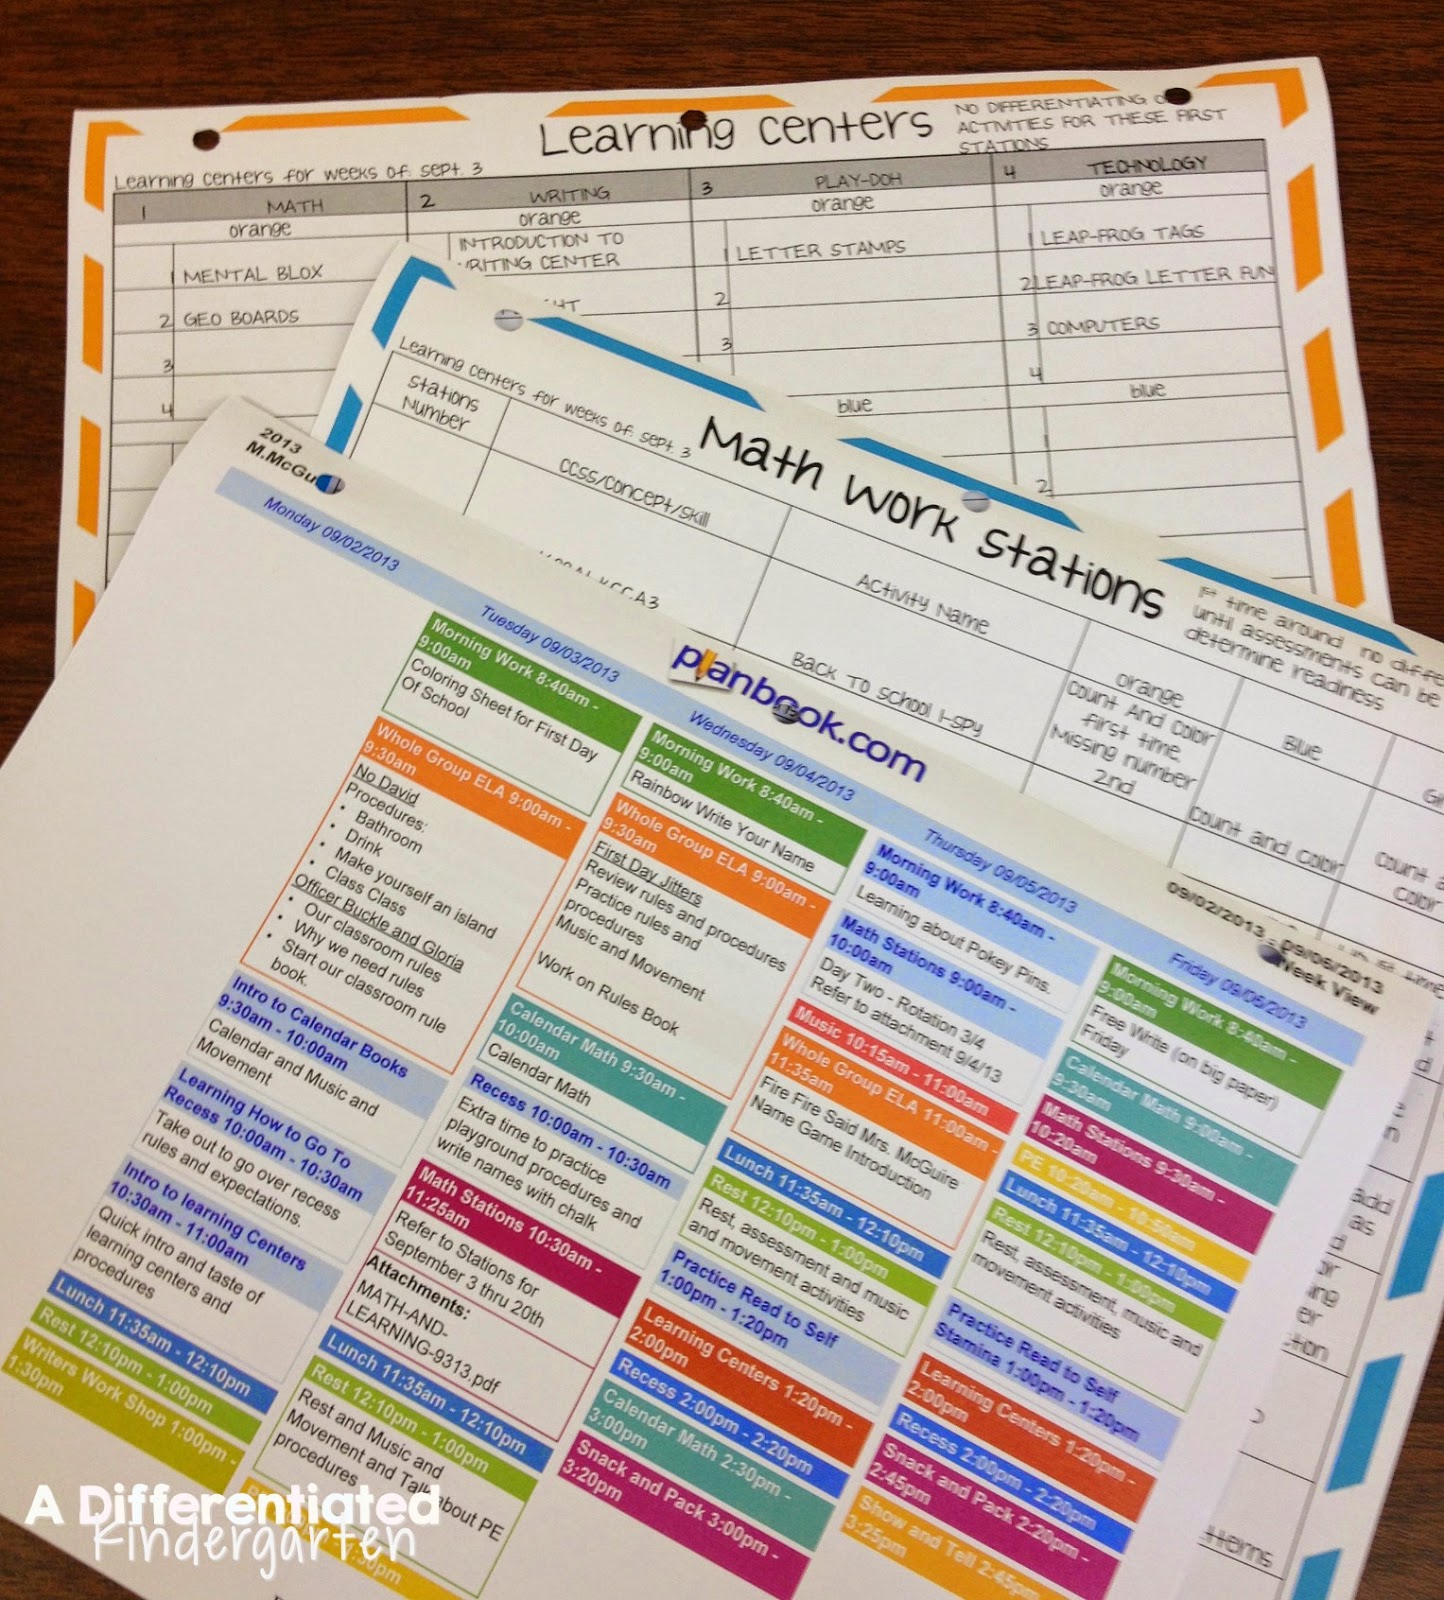 This blog post has daily schedules for a kindergarten classroom